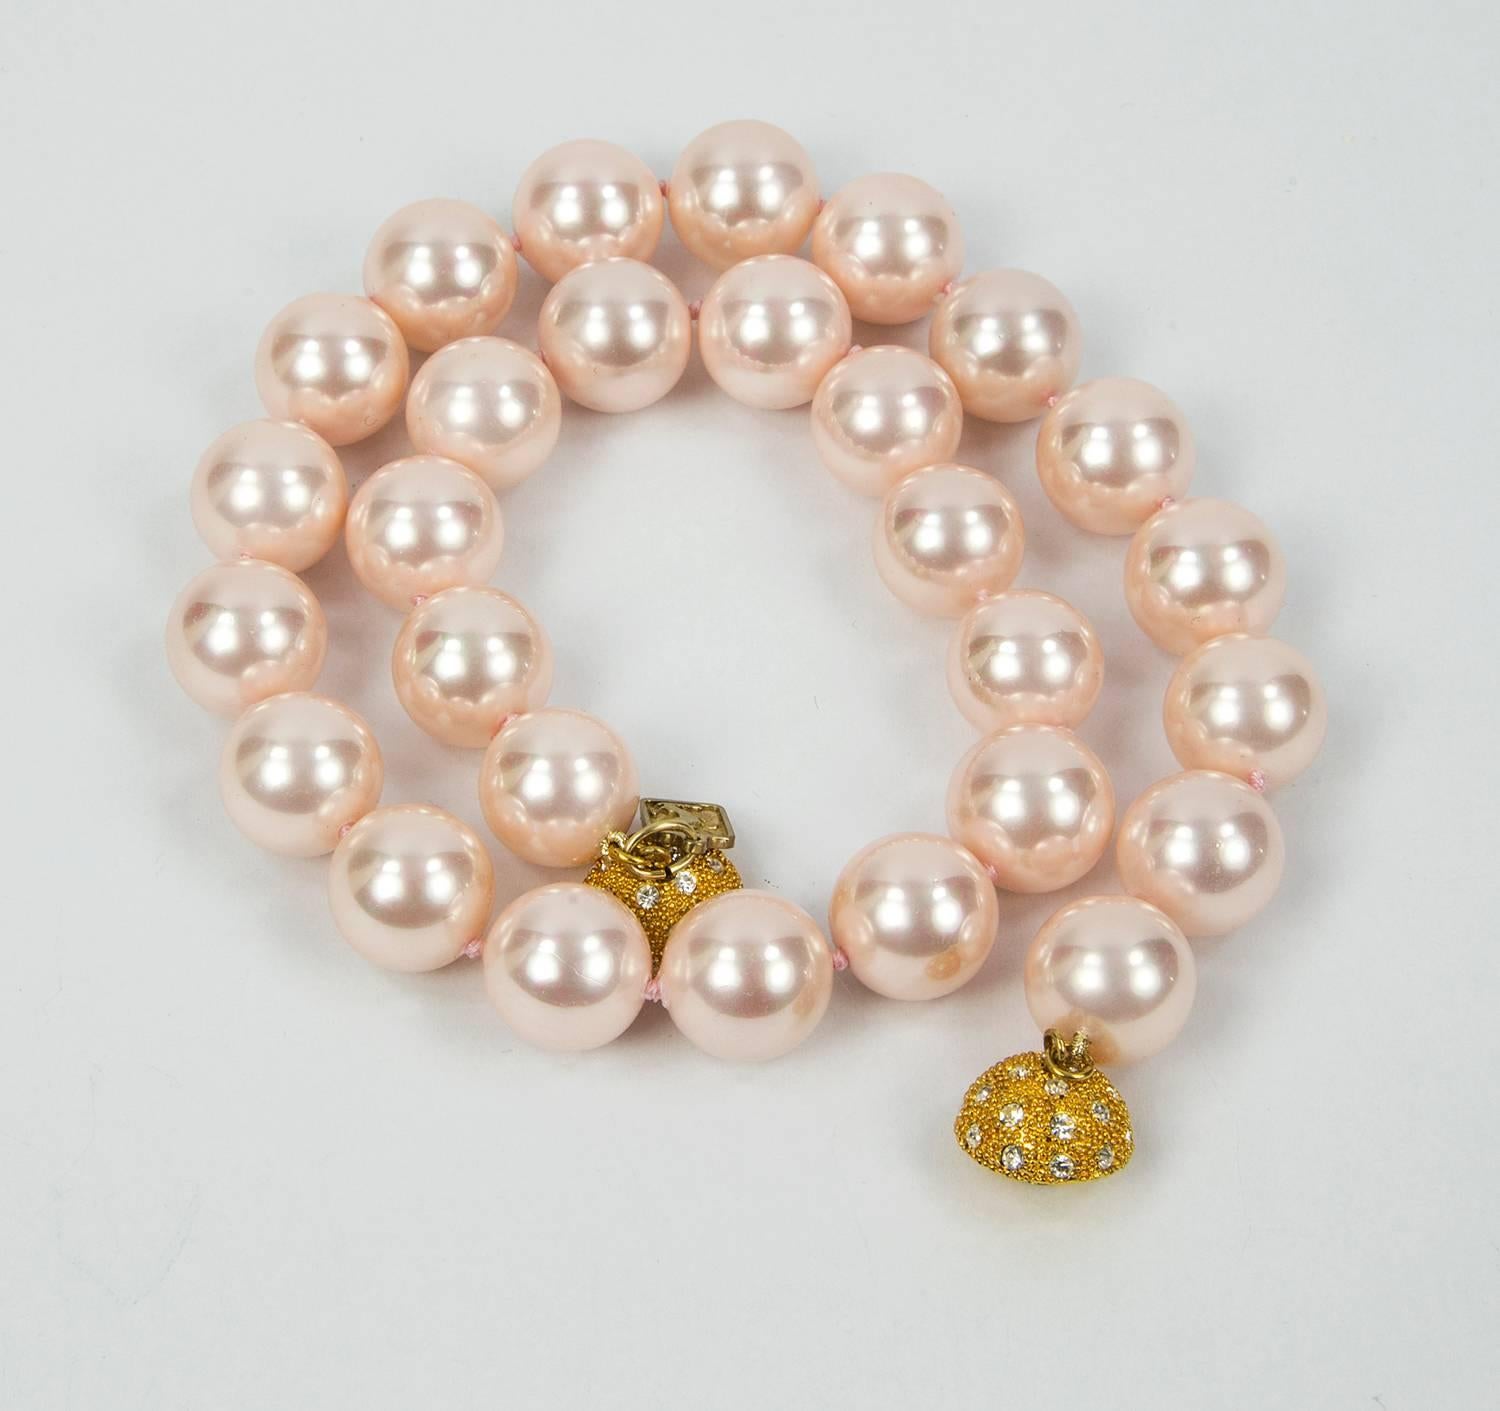 Stunning Lustrous and Luscious Pink round Faux Pearl Necklace; Each Pearl measuring approx 14.5mm; hand knotted with matching color silk thread; held by a round CZ encrusted clasp; approx 17.75” long. Chic and Timeless strand of Pearls, taking you